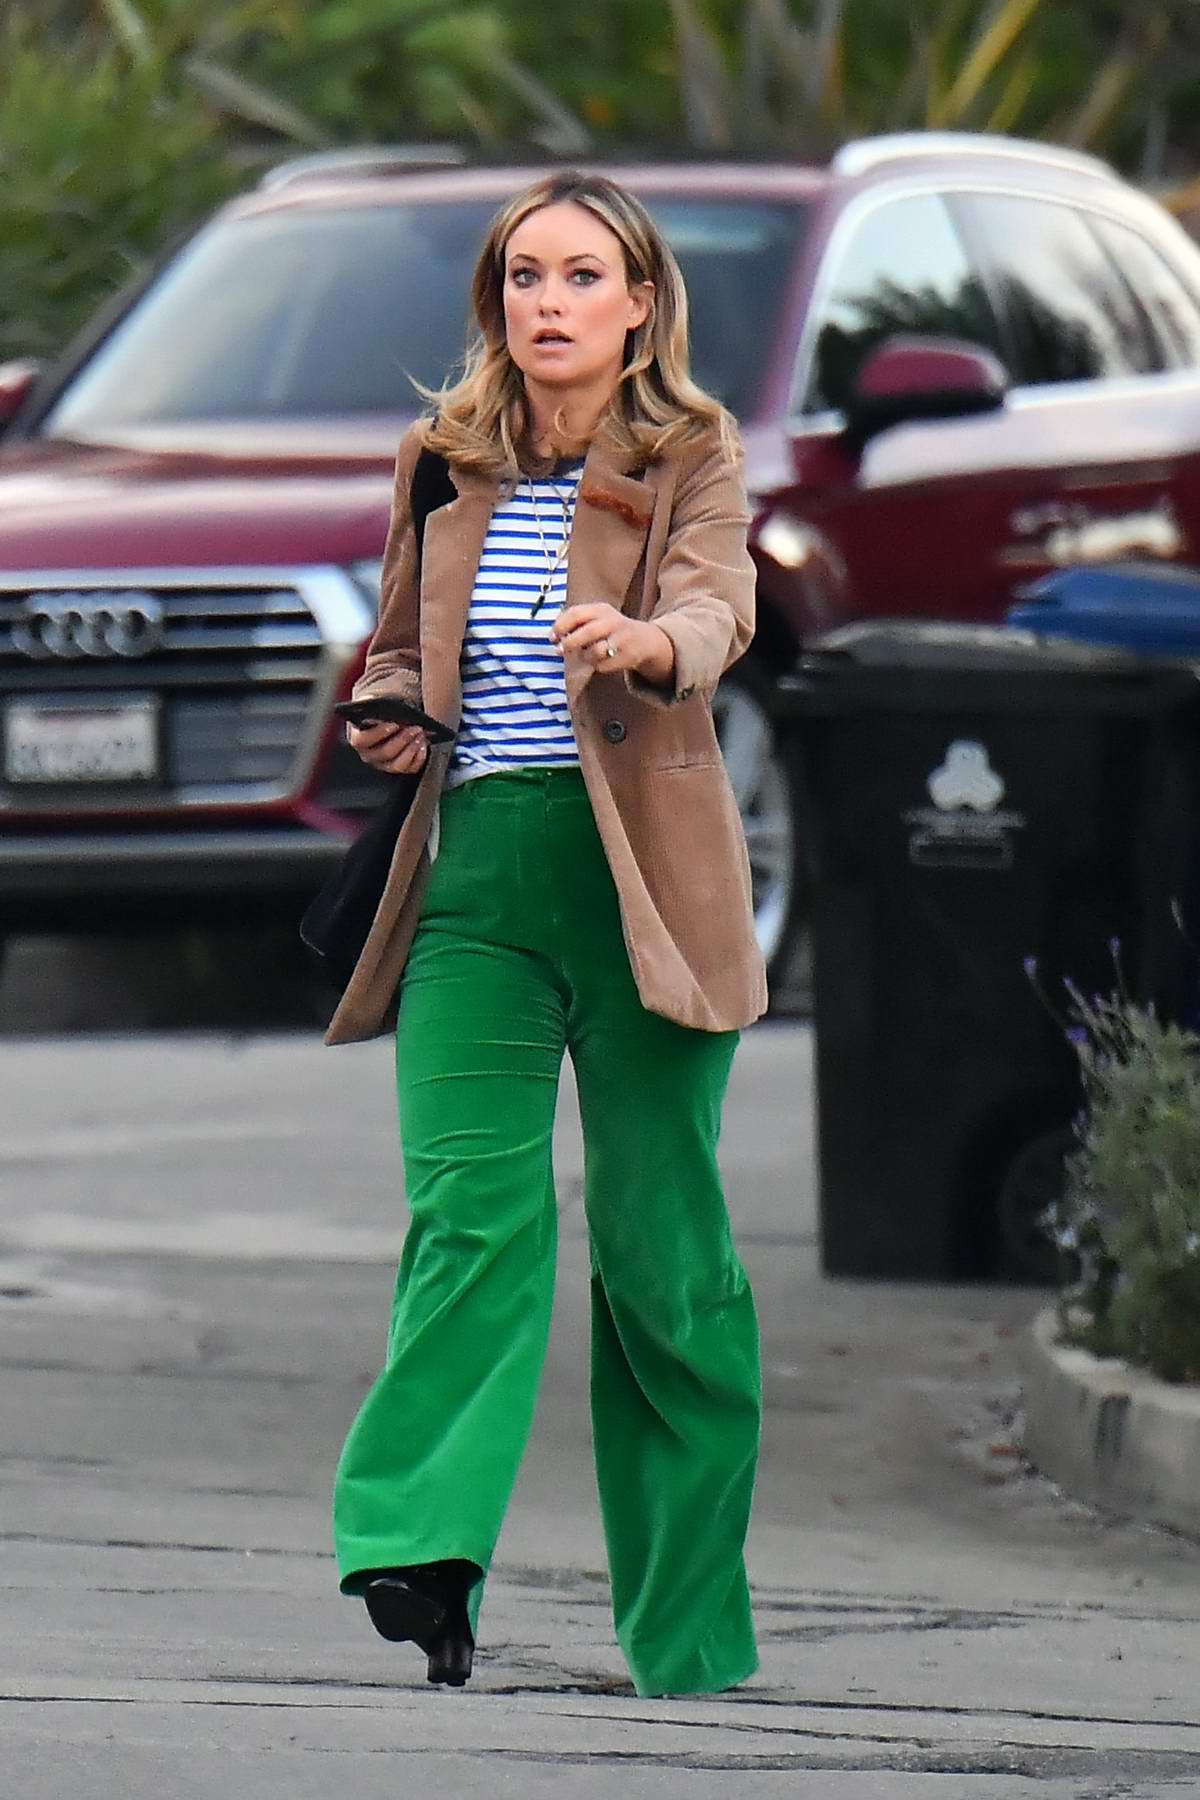 https://www.celebsfirst.com/wp-content/uploads/2019/12/olivia-wilde-looks-great-in-bright-green-pants-and-brown-blazer-as-she-heads-to-dinner-in-los-angeles-121219_3.jpg